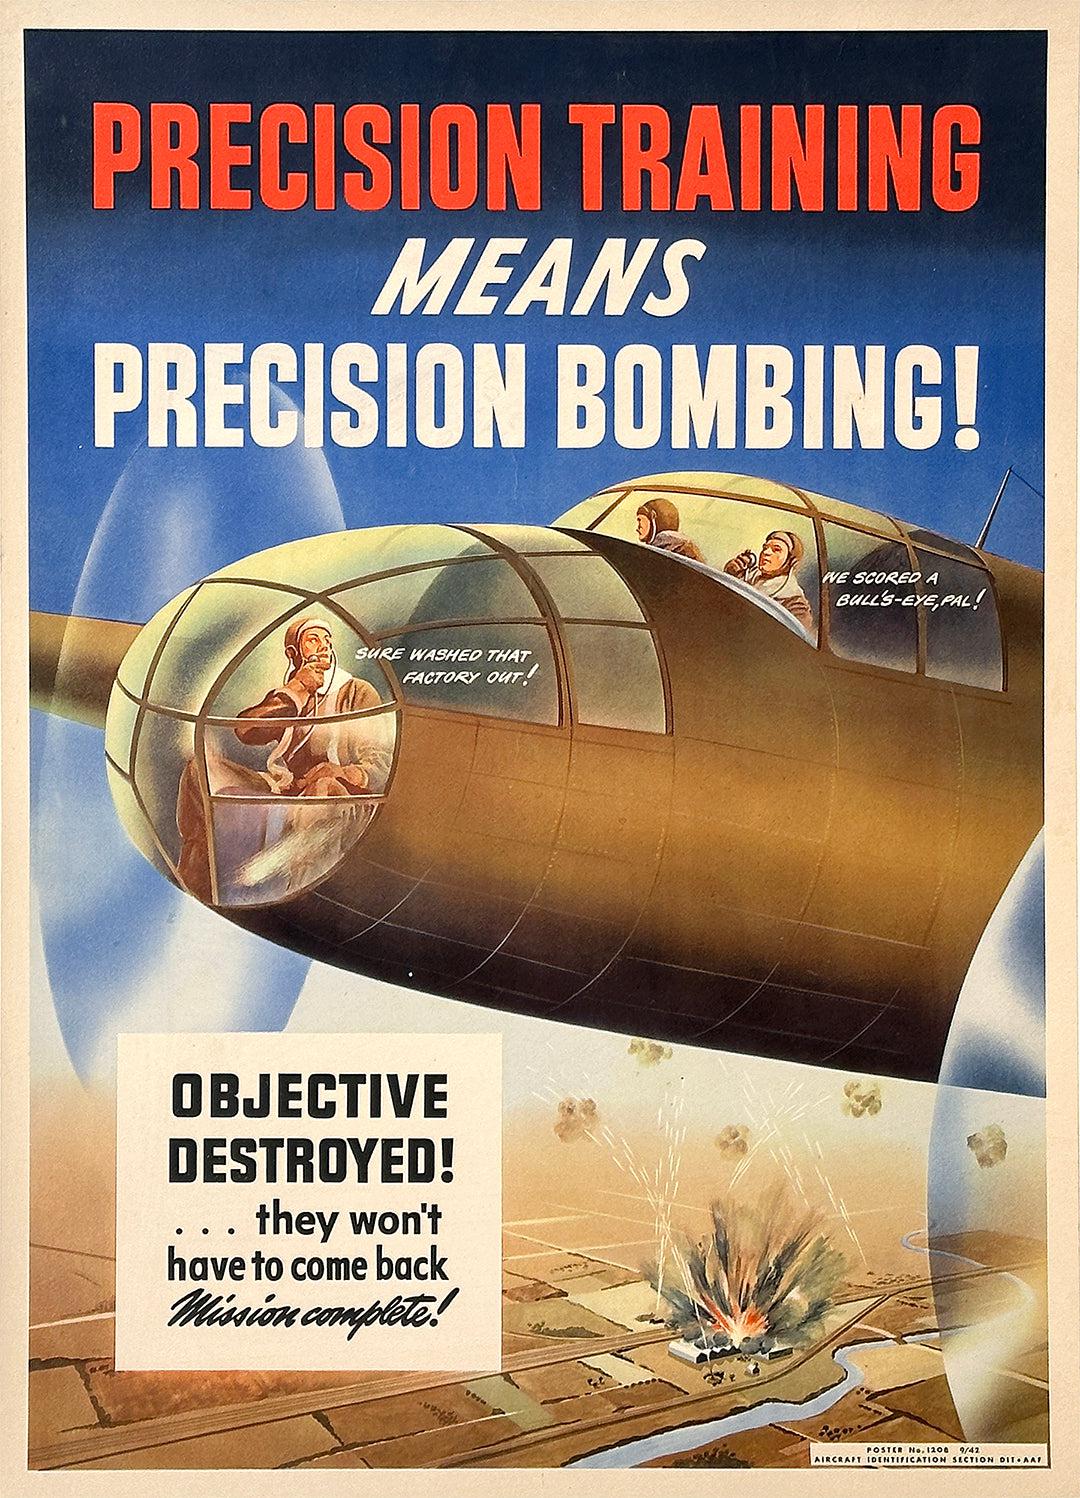 Original Vintage WWII Precision Training Means Precision Bombing Air Force Poster 1942